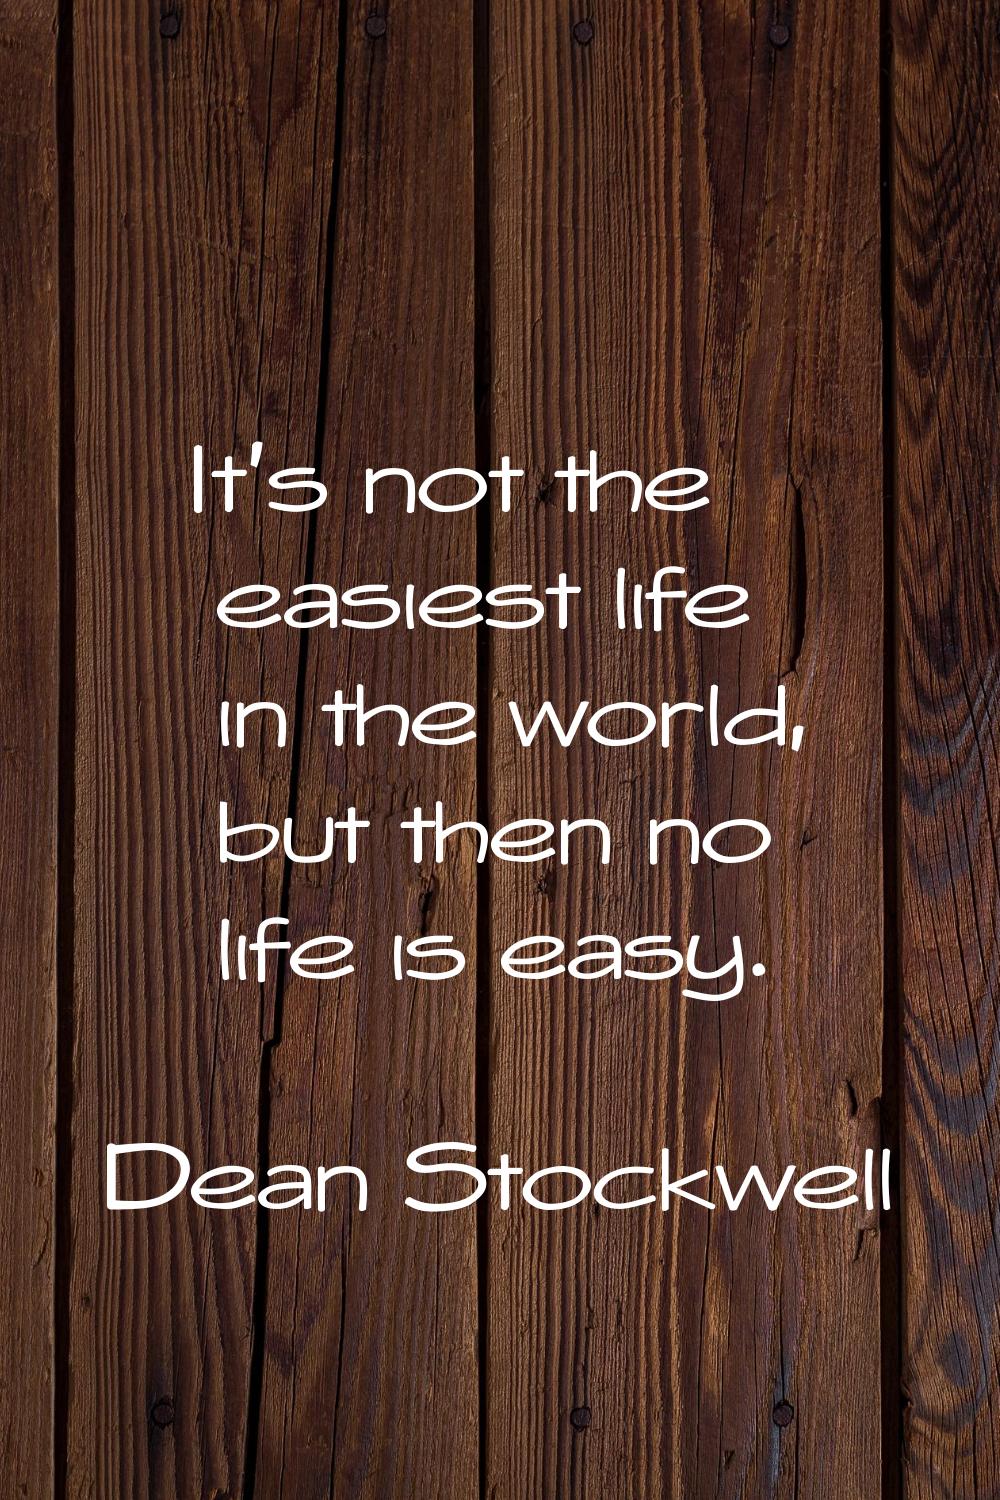 It's not the easiest life in the world, but then no life is easy.